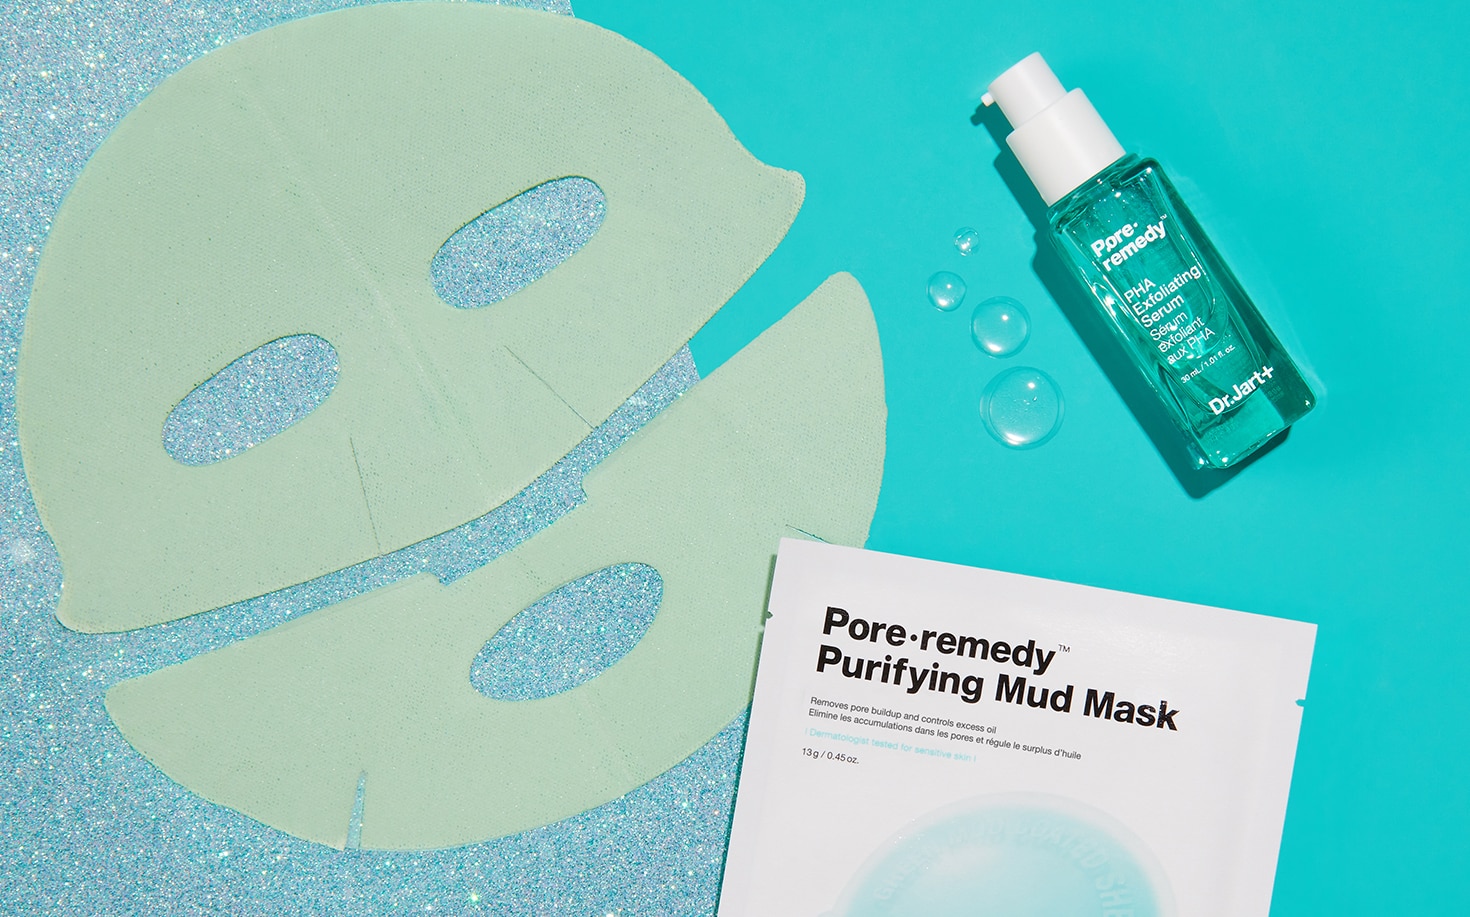 Pore Remedy Serum and Pore Remedy Mud Mask components are laid out across an aqua background with droplets of liquid serum.